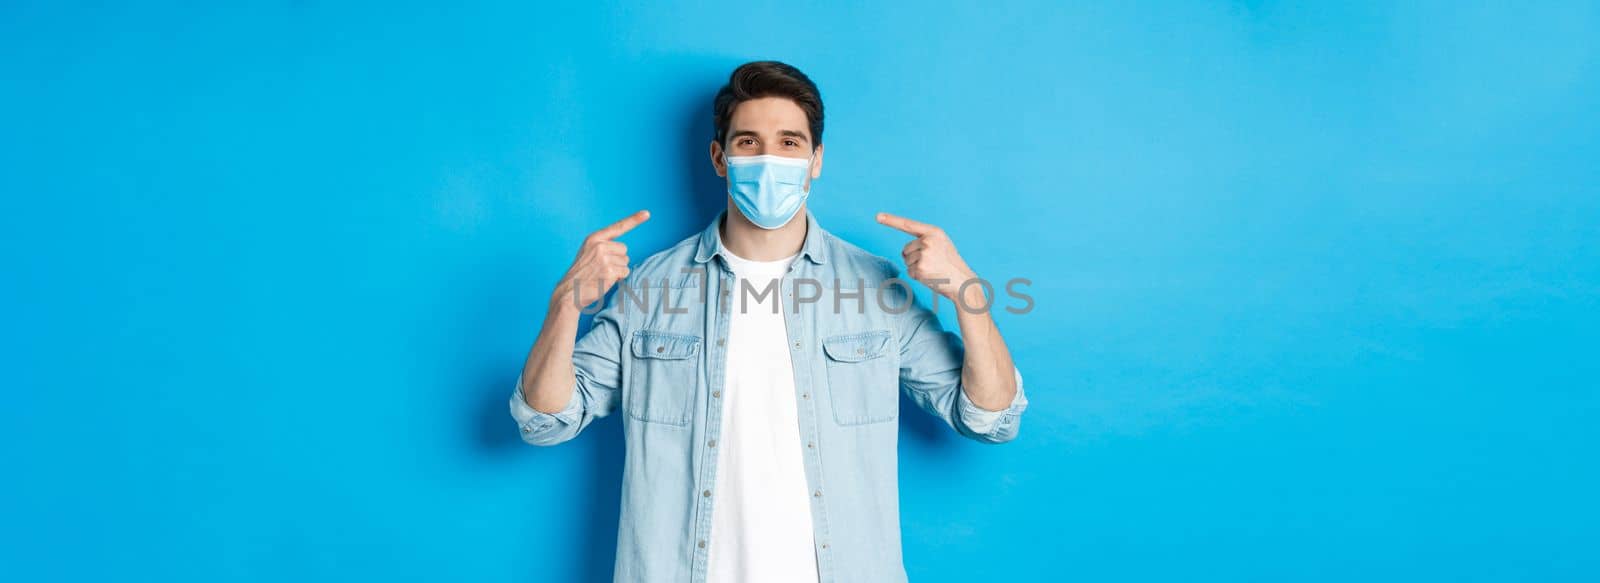 Concept of coronavirus, quarantine and social distancing. Handsome man pointing at medical mask and smiling, protection from virus spread during pandemic, blue background by Benzoix